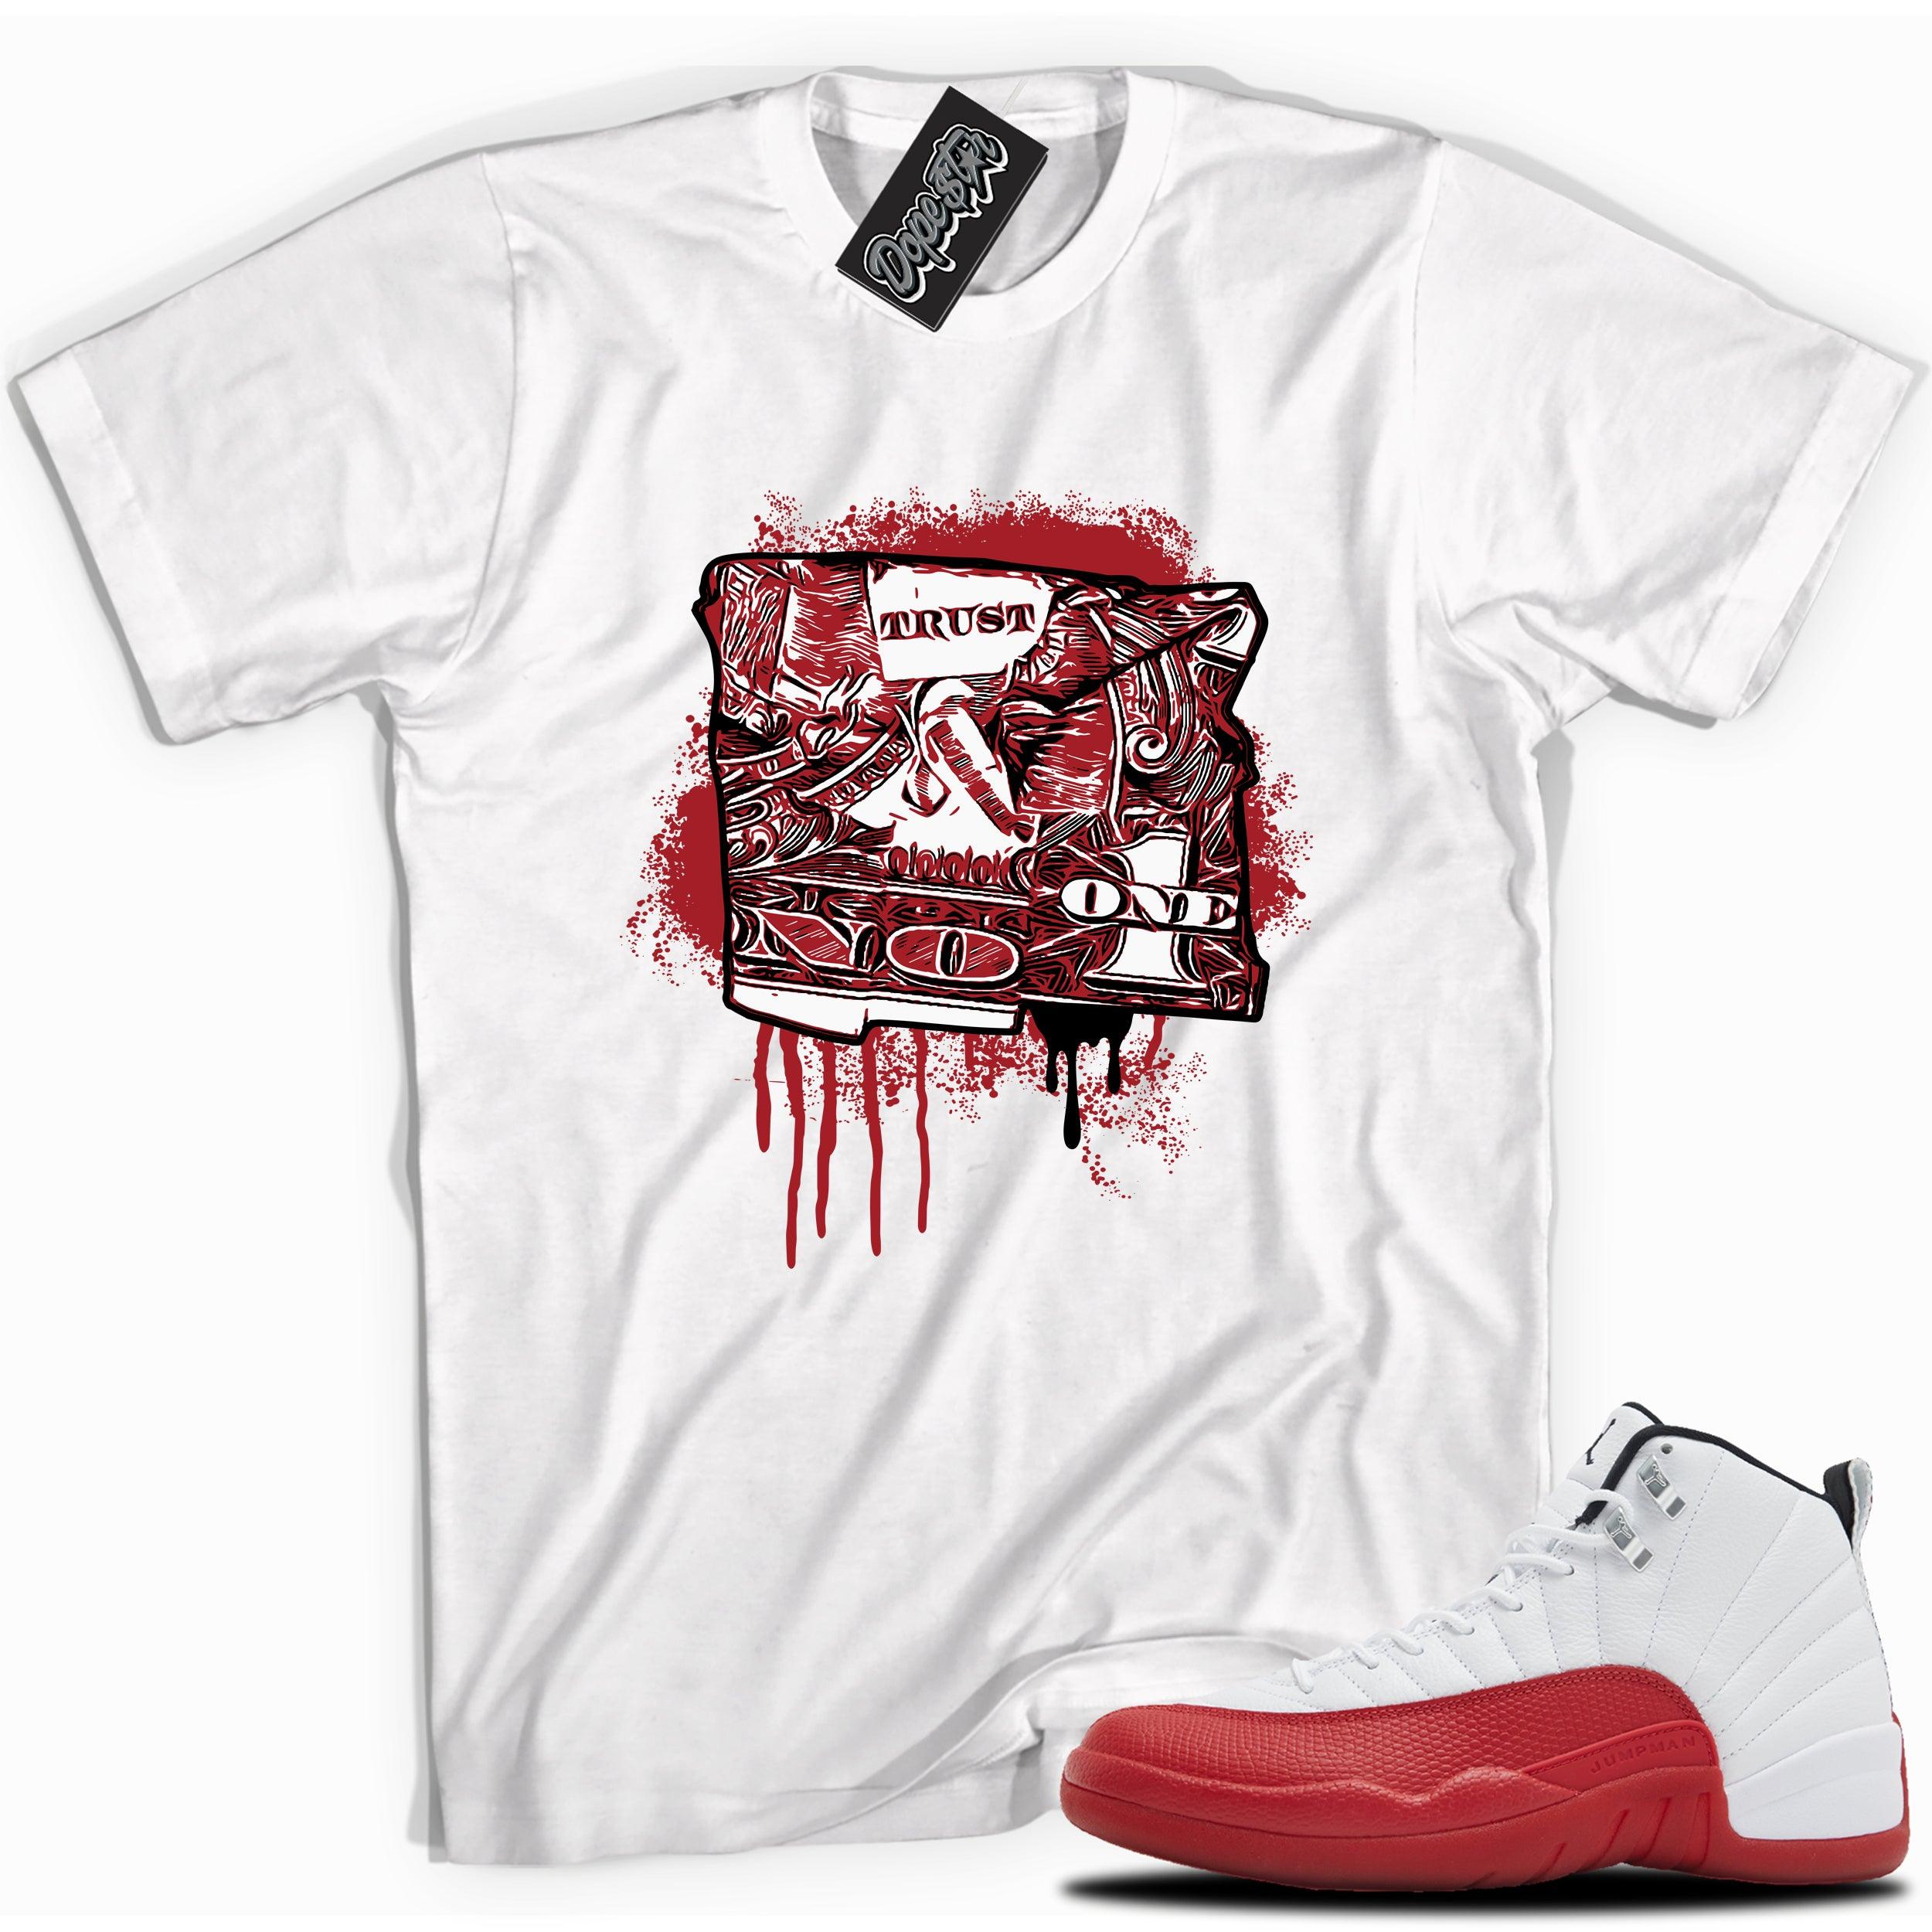 Cool white graphic tee with “Trust No One” print, that perfectly matches Air Jordan 12 Retro Cherry Red 2023 red and white sneakers 